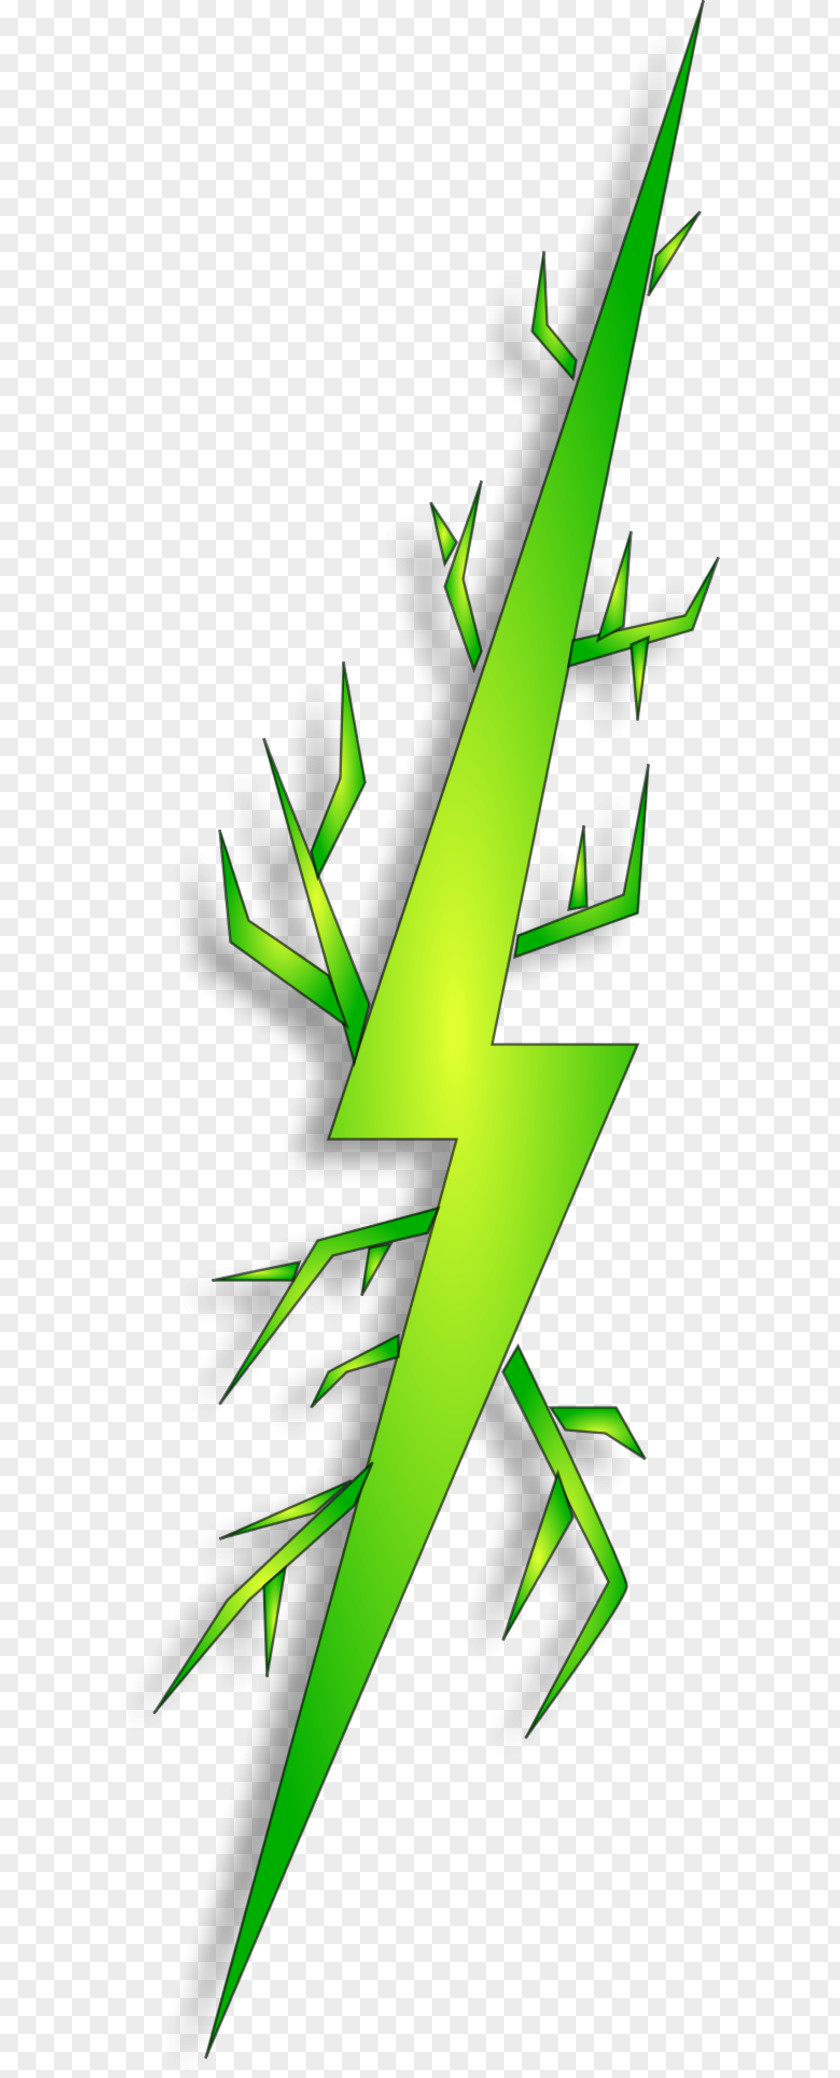 Electric Spark Electricity Clip Art PNG